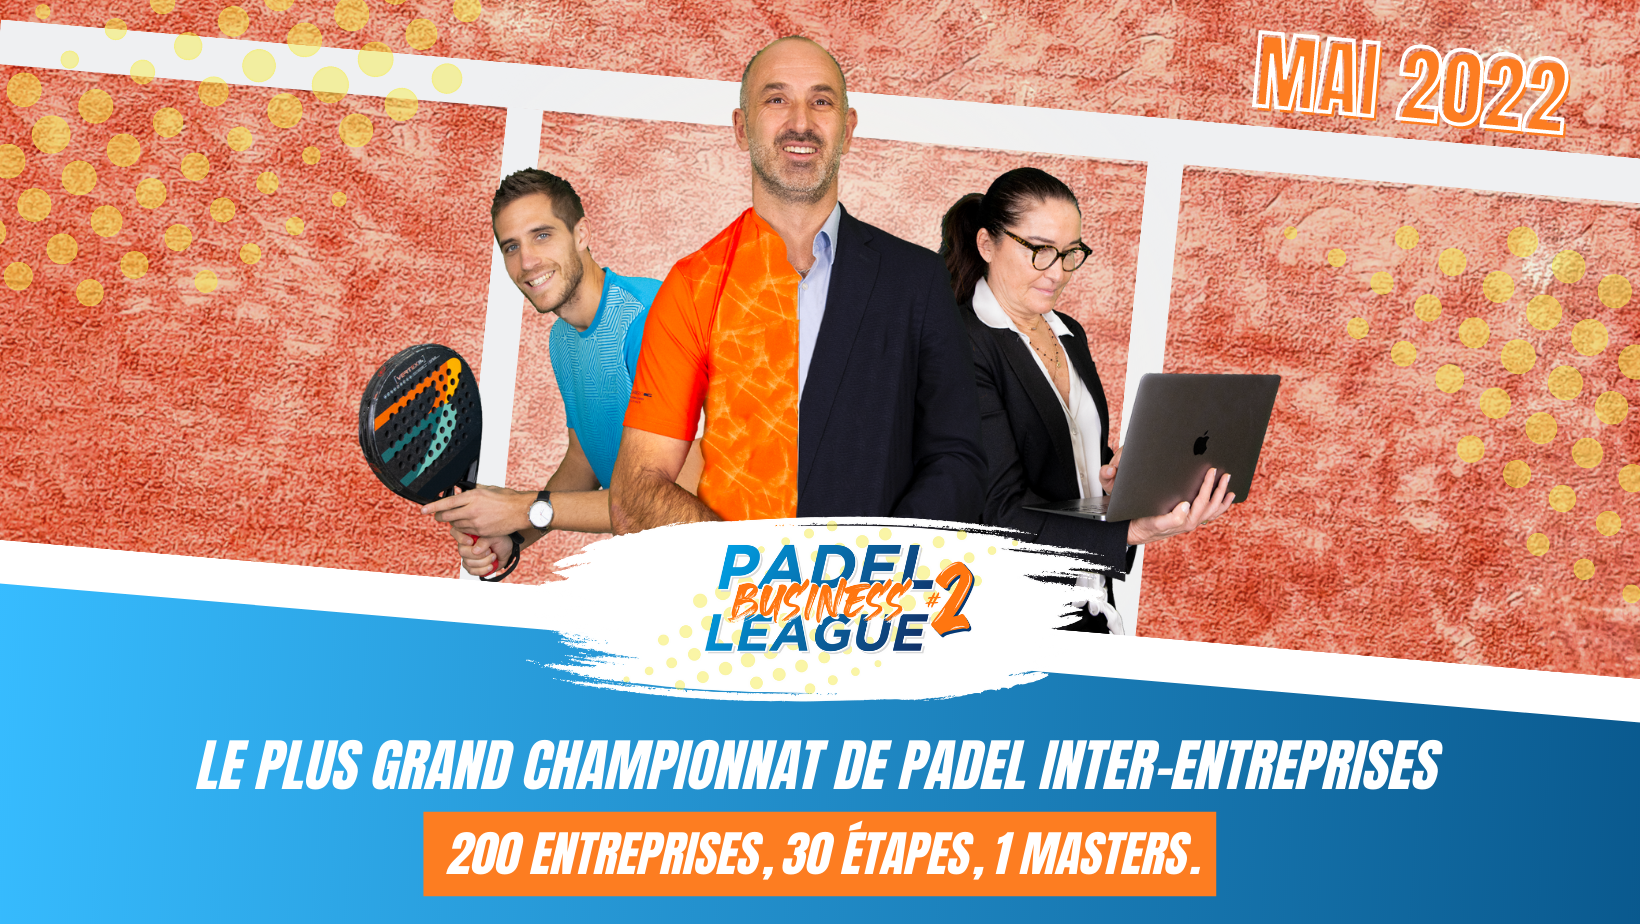 Padel Business League: a first edition that ends successfully!